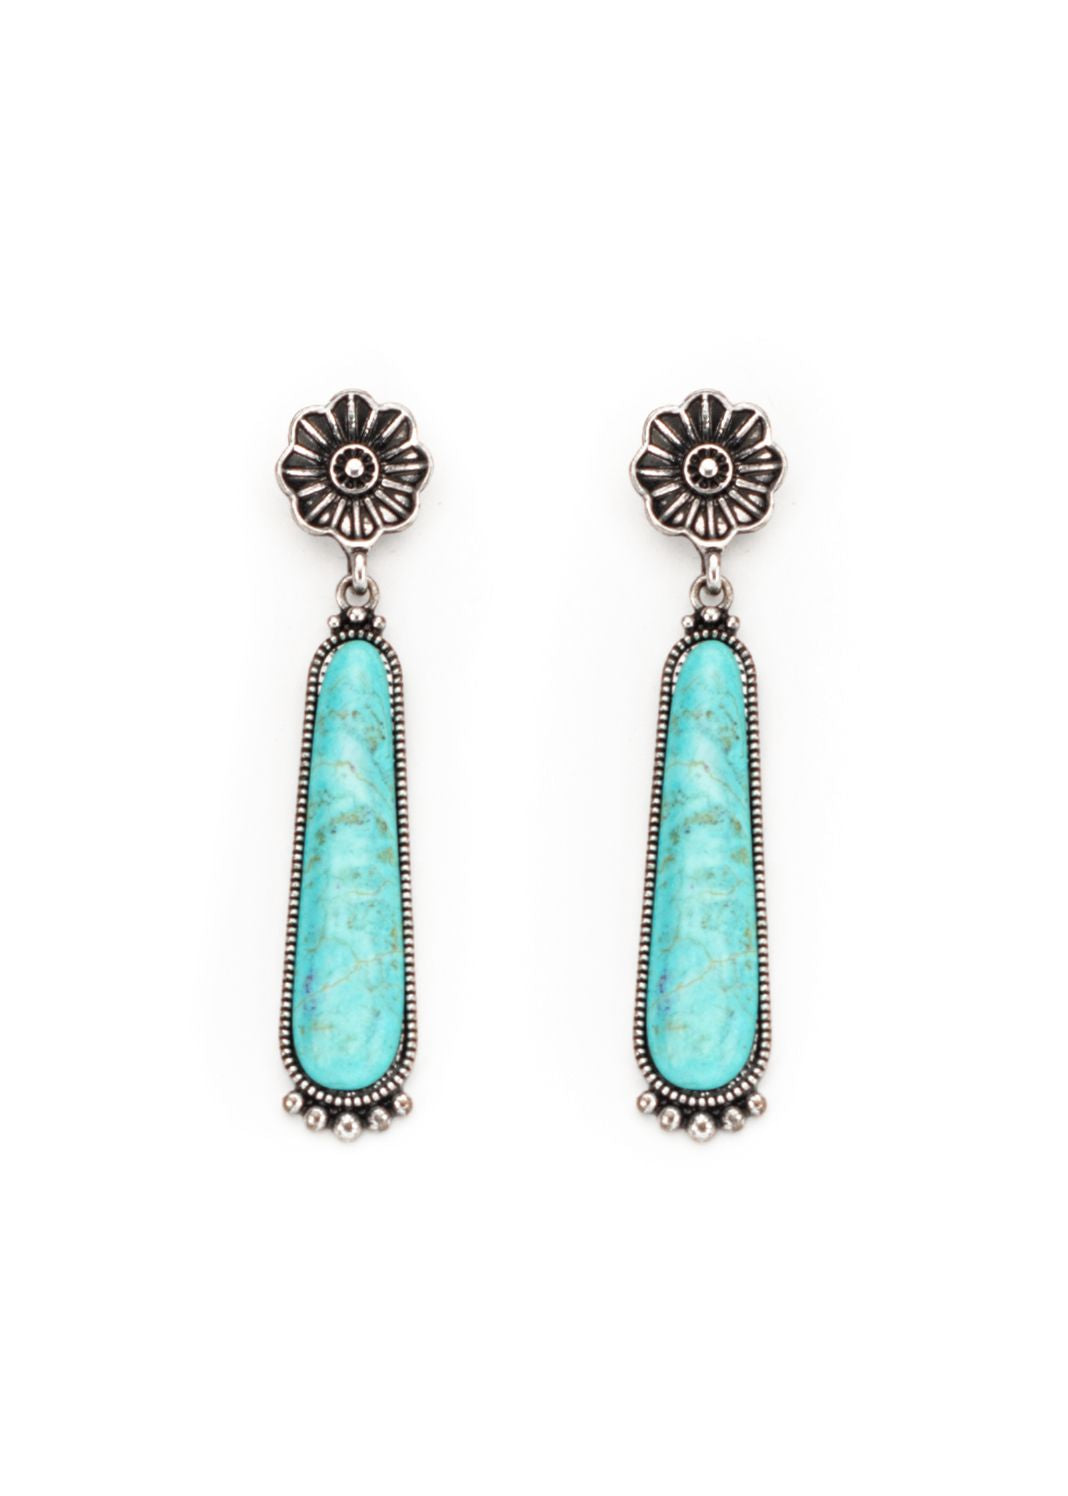 Turquoise Elongated Earrings on Burnished Silver Flower Post